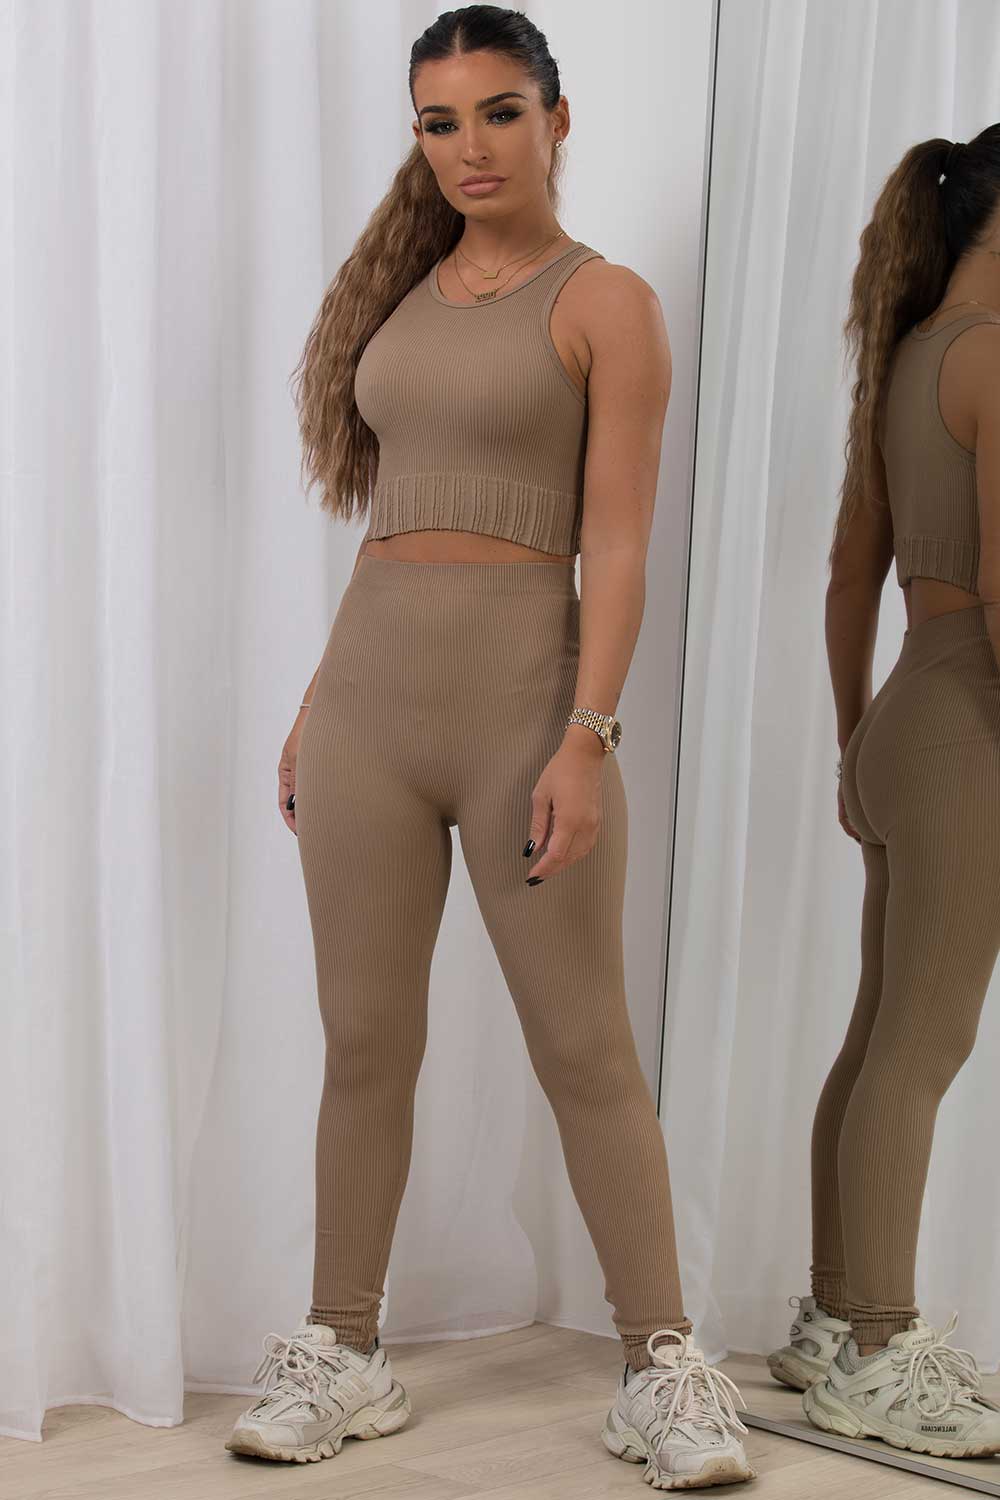 ribbed lounge set gym wear co ord womens